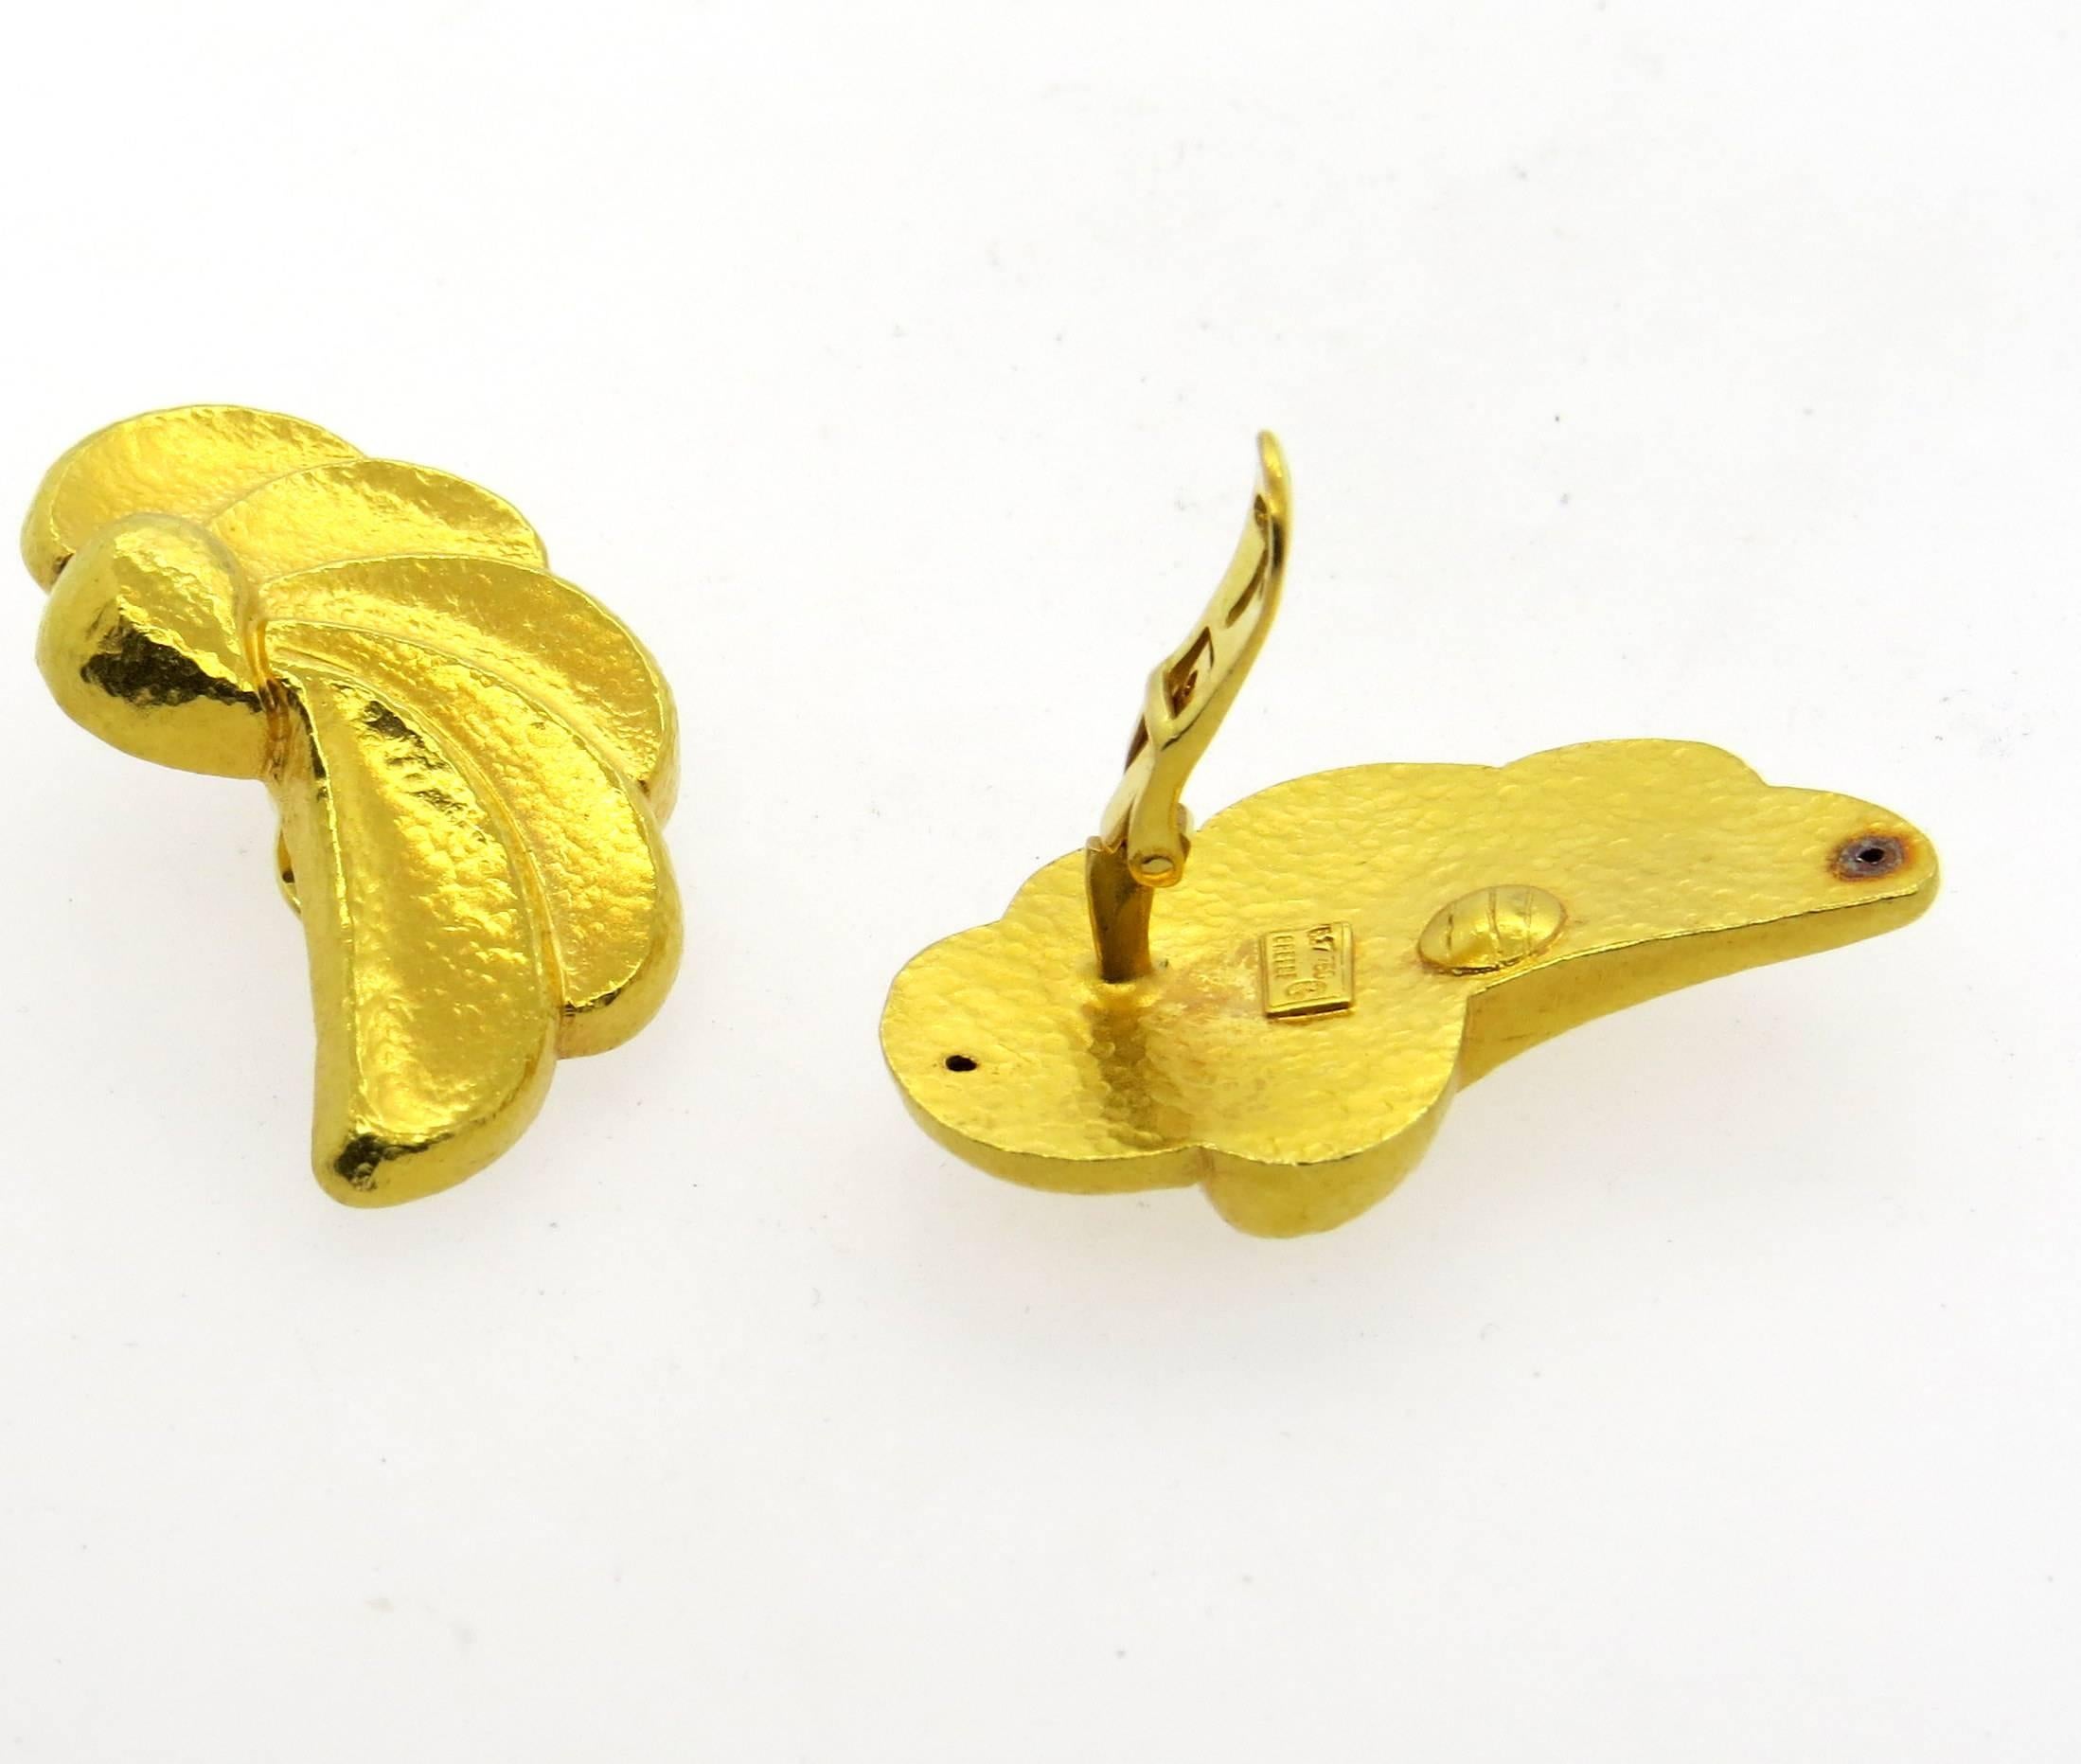 A pair of large 18 hammered gold earrings, featuring wings motif design, crafted by Greek designer Ilias Lalaounis. Earrings measure 39mm x 23mm . Marked: 750, Greece, Maker's hallmark 117. Weight - 27.5 grams 